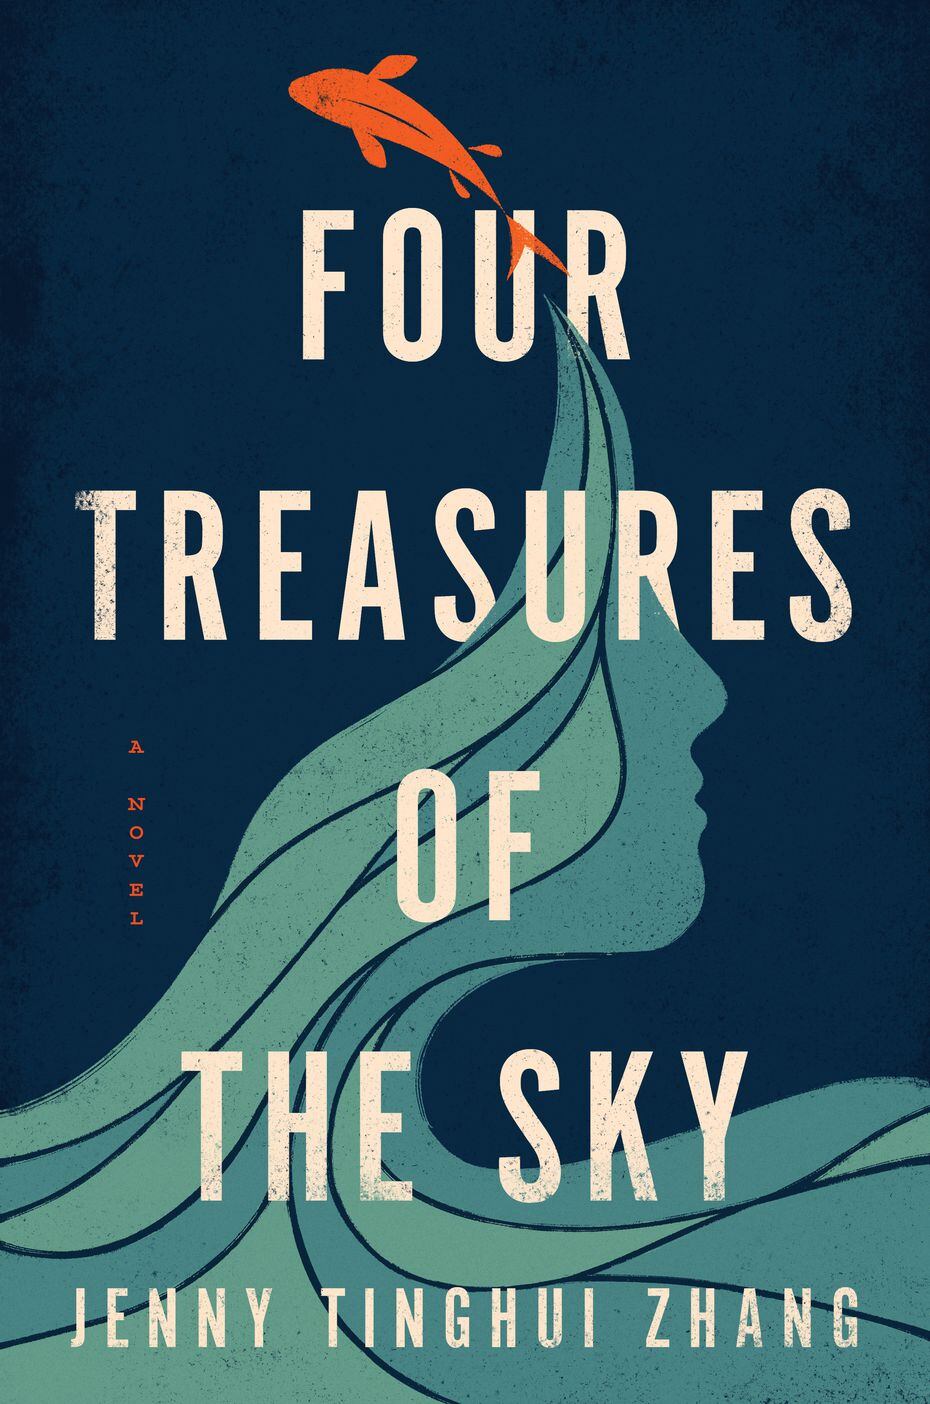 "Four Treasures of the Sky" by Jenny Tinghui Zhang is set against the backdrop of the...